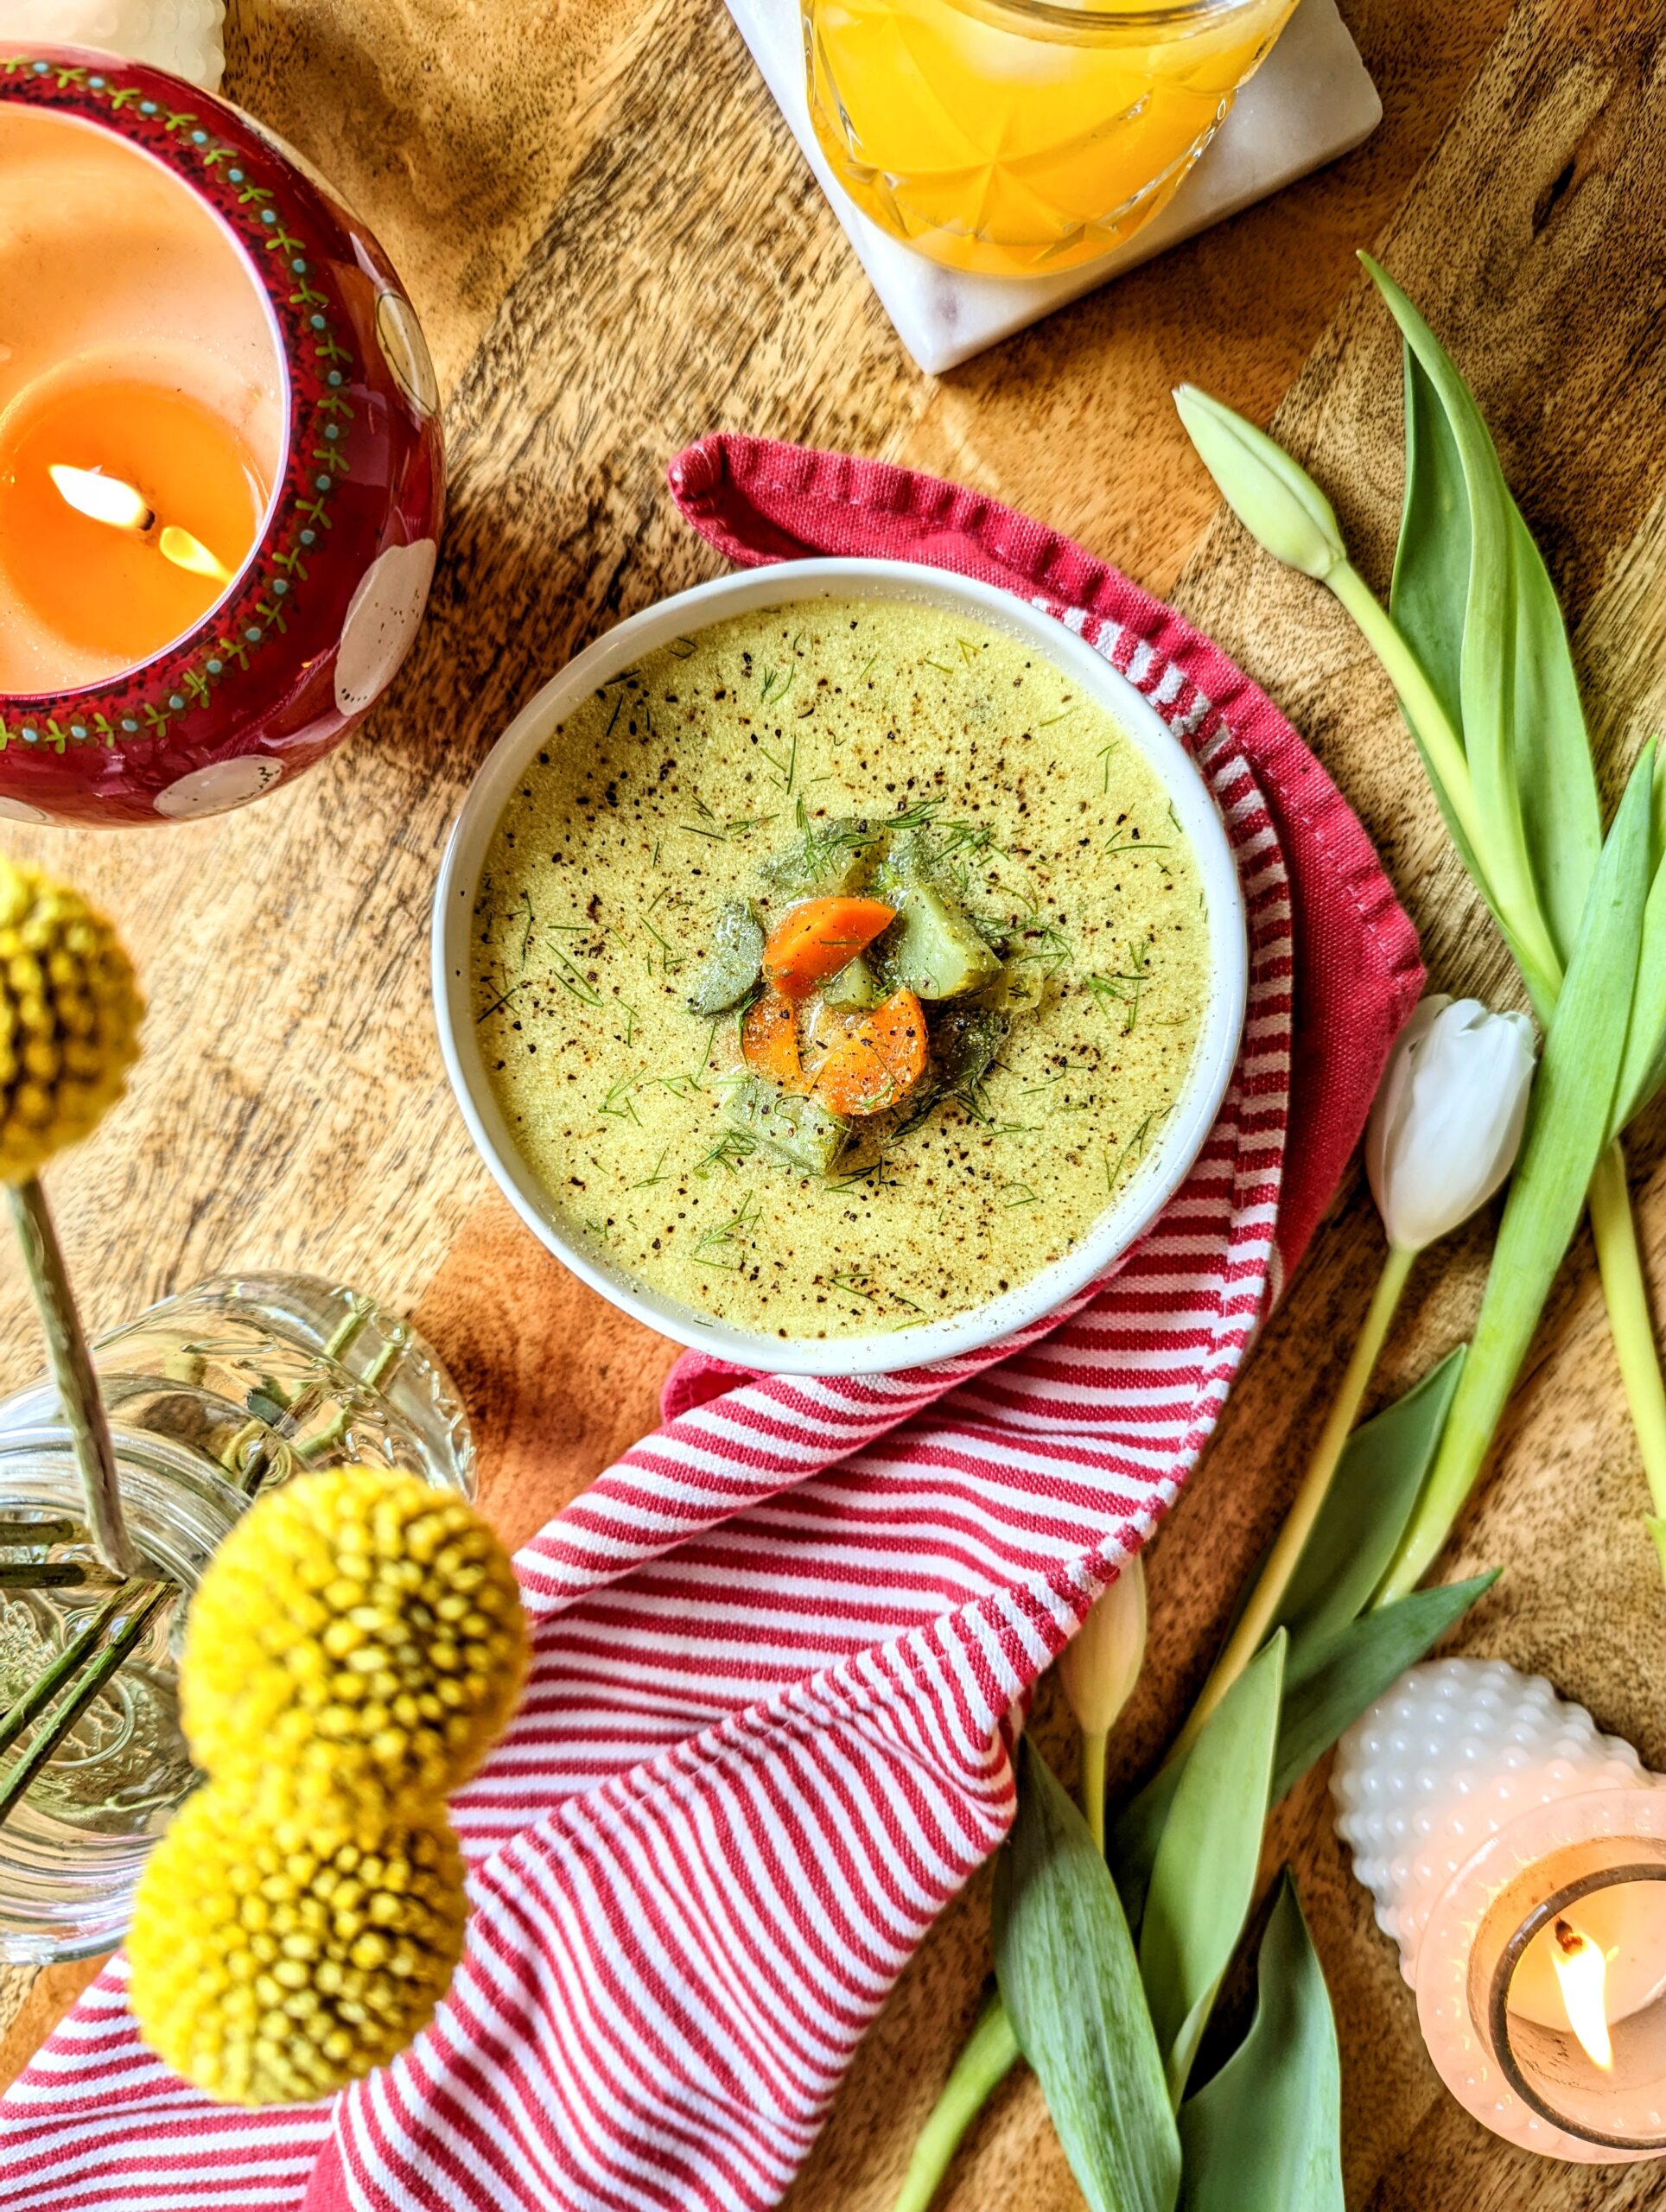 A bowl of soup with green dill pickles, orange carrots, and black pepper. White and yellow flowers, along with lite candles can be seen.